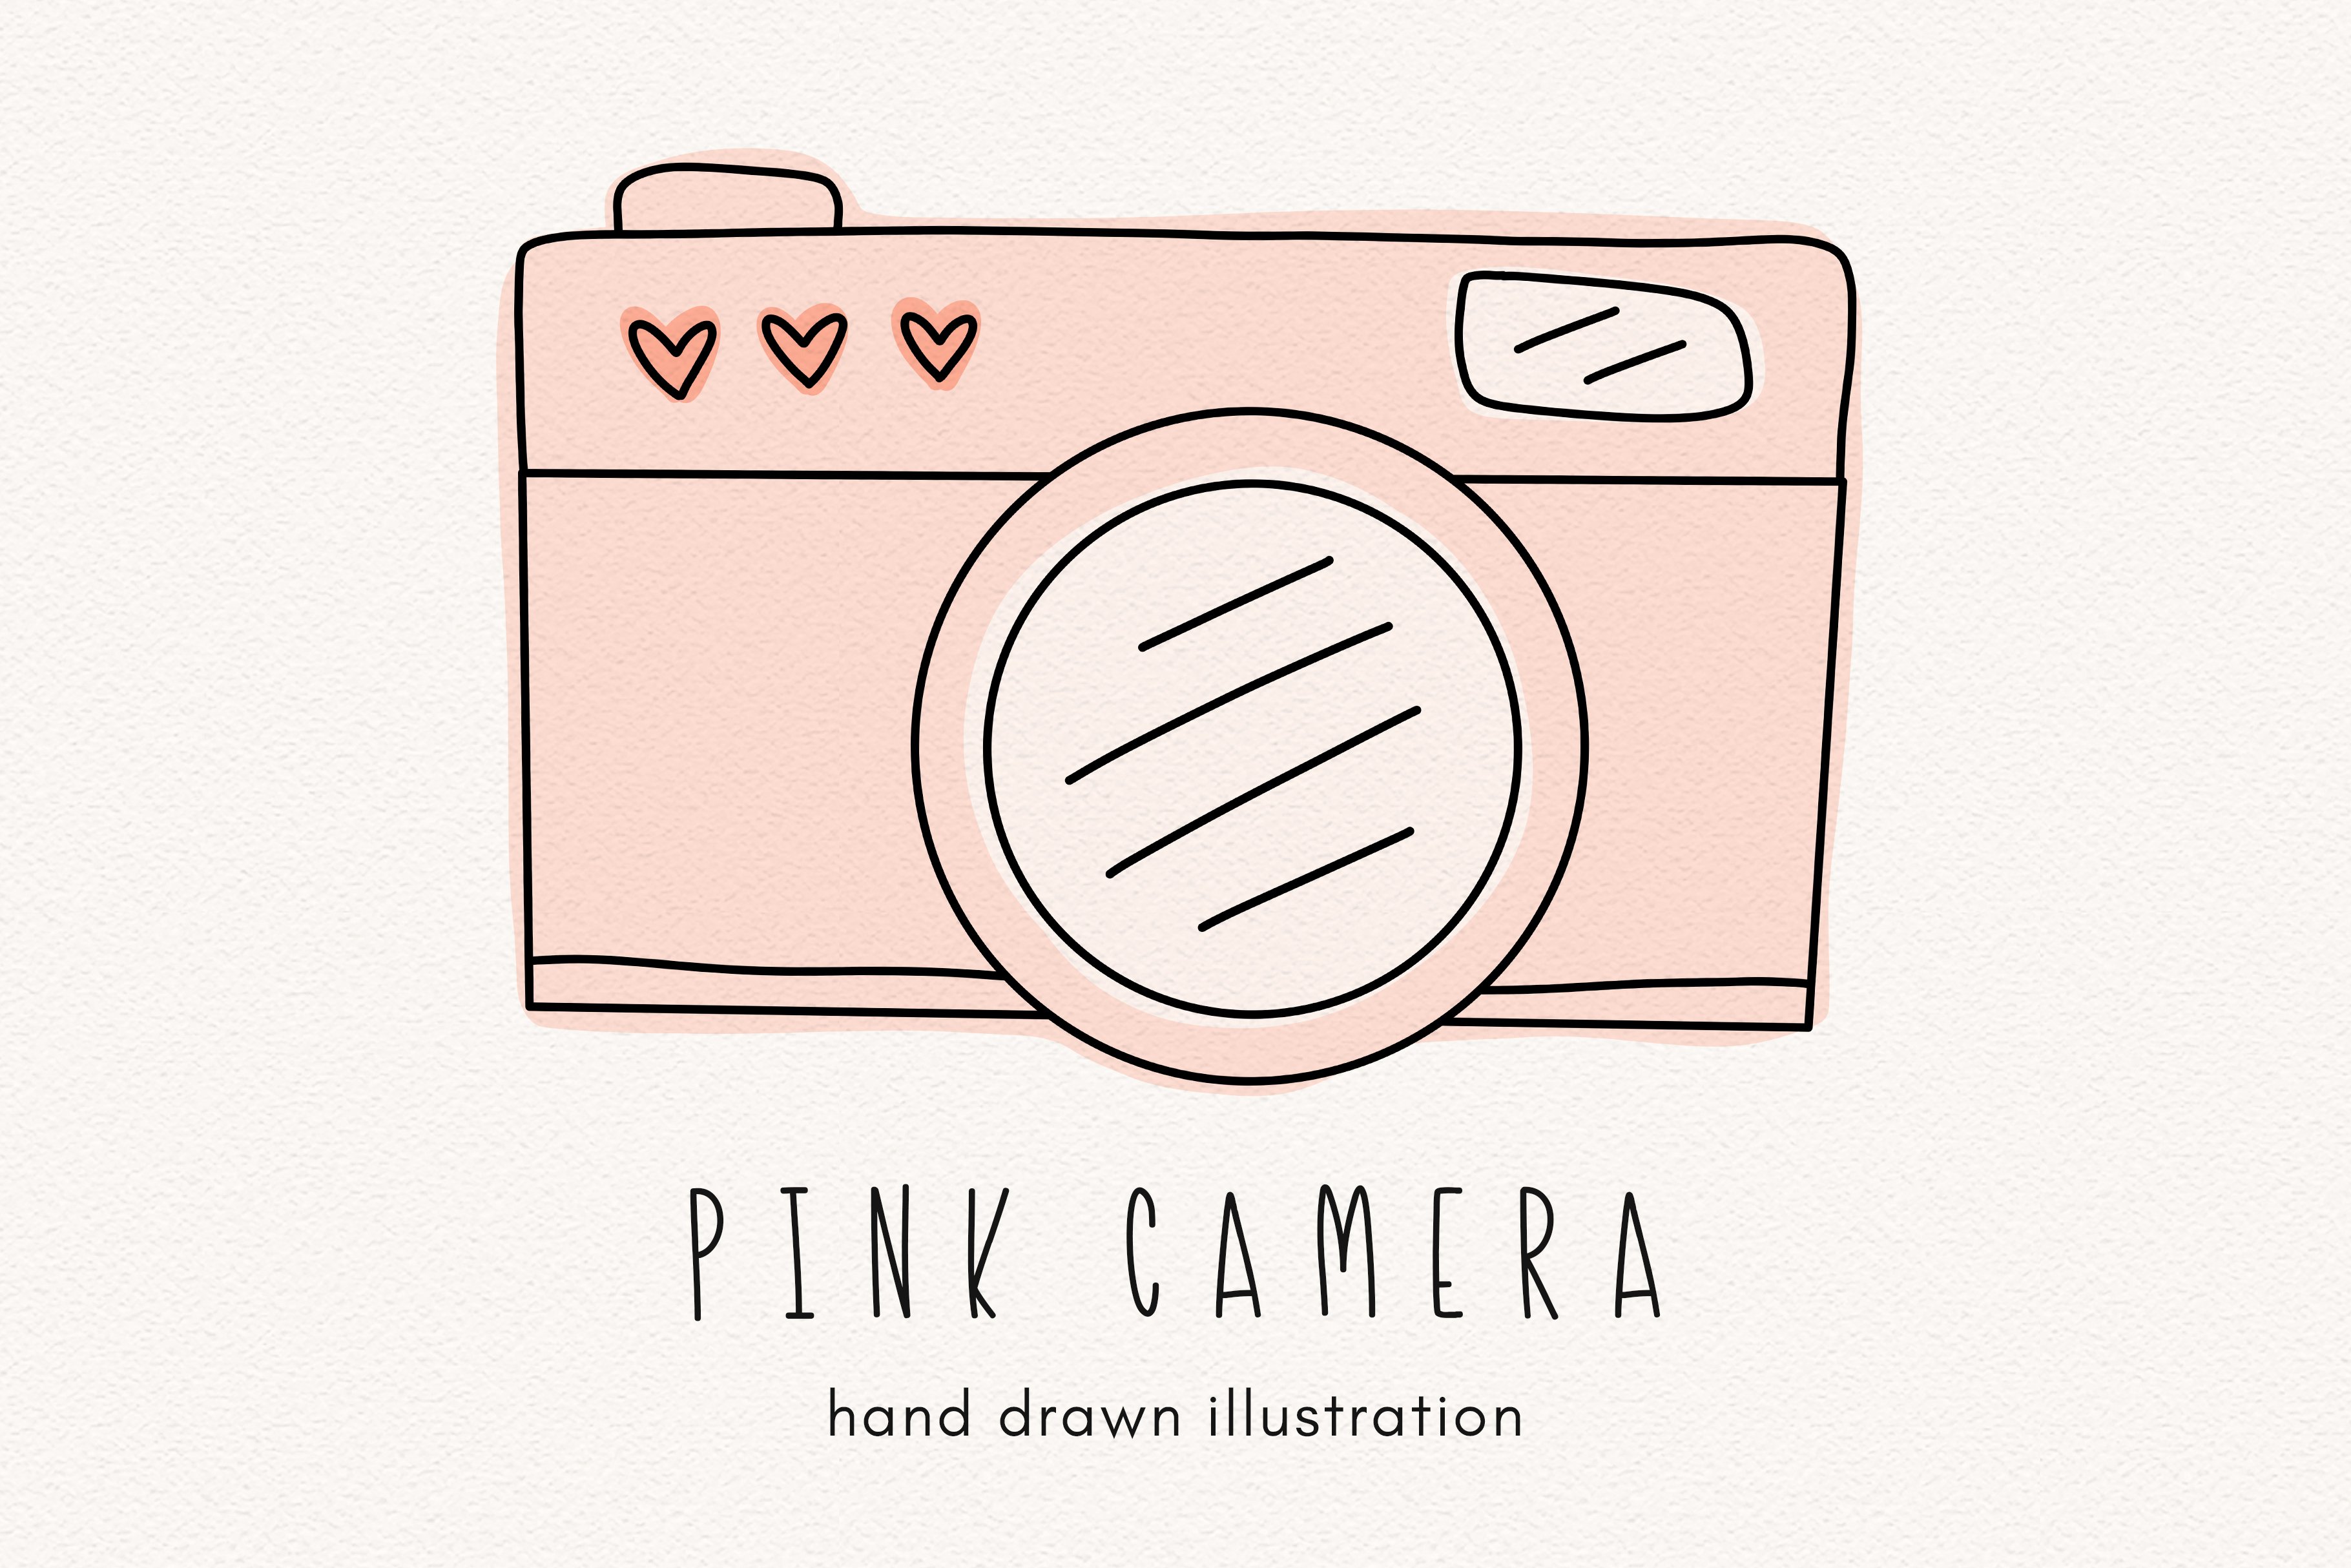 Pink camera clipart illustration cover image.